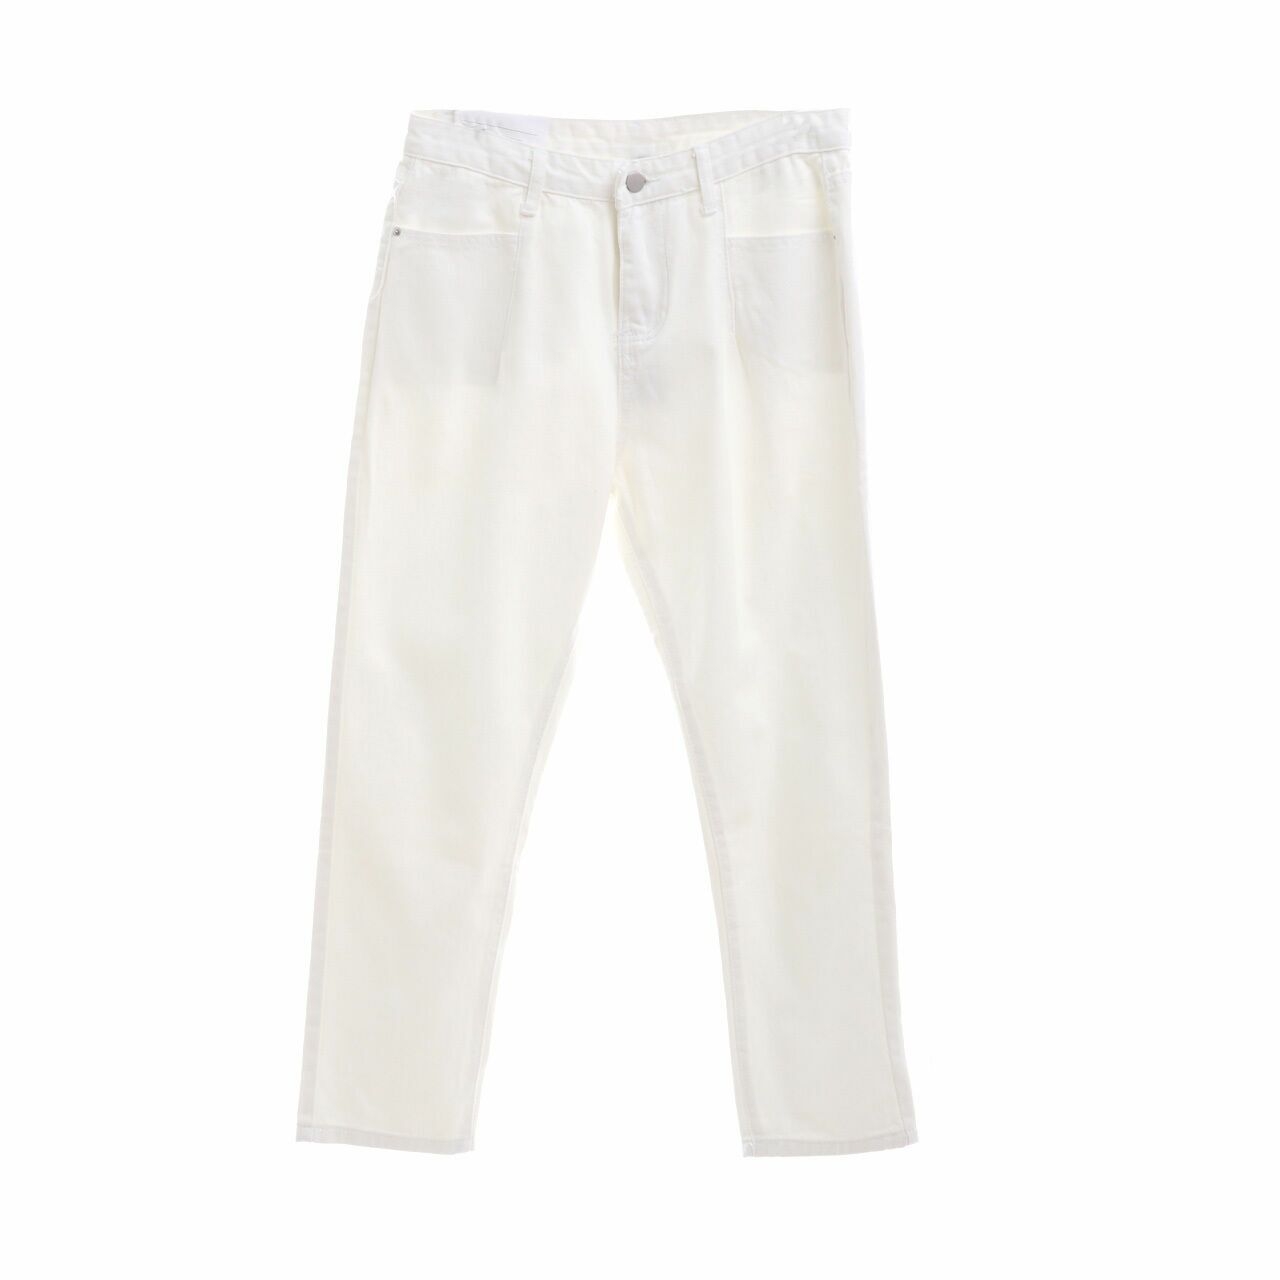 This is April White Long Pants 